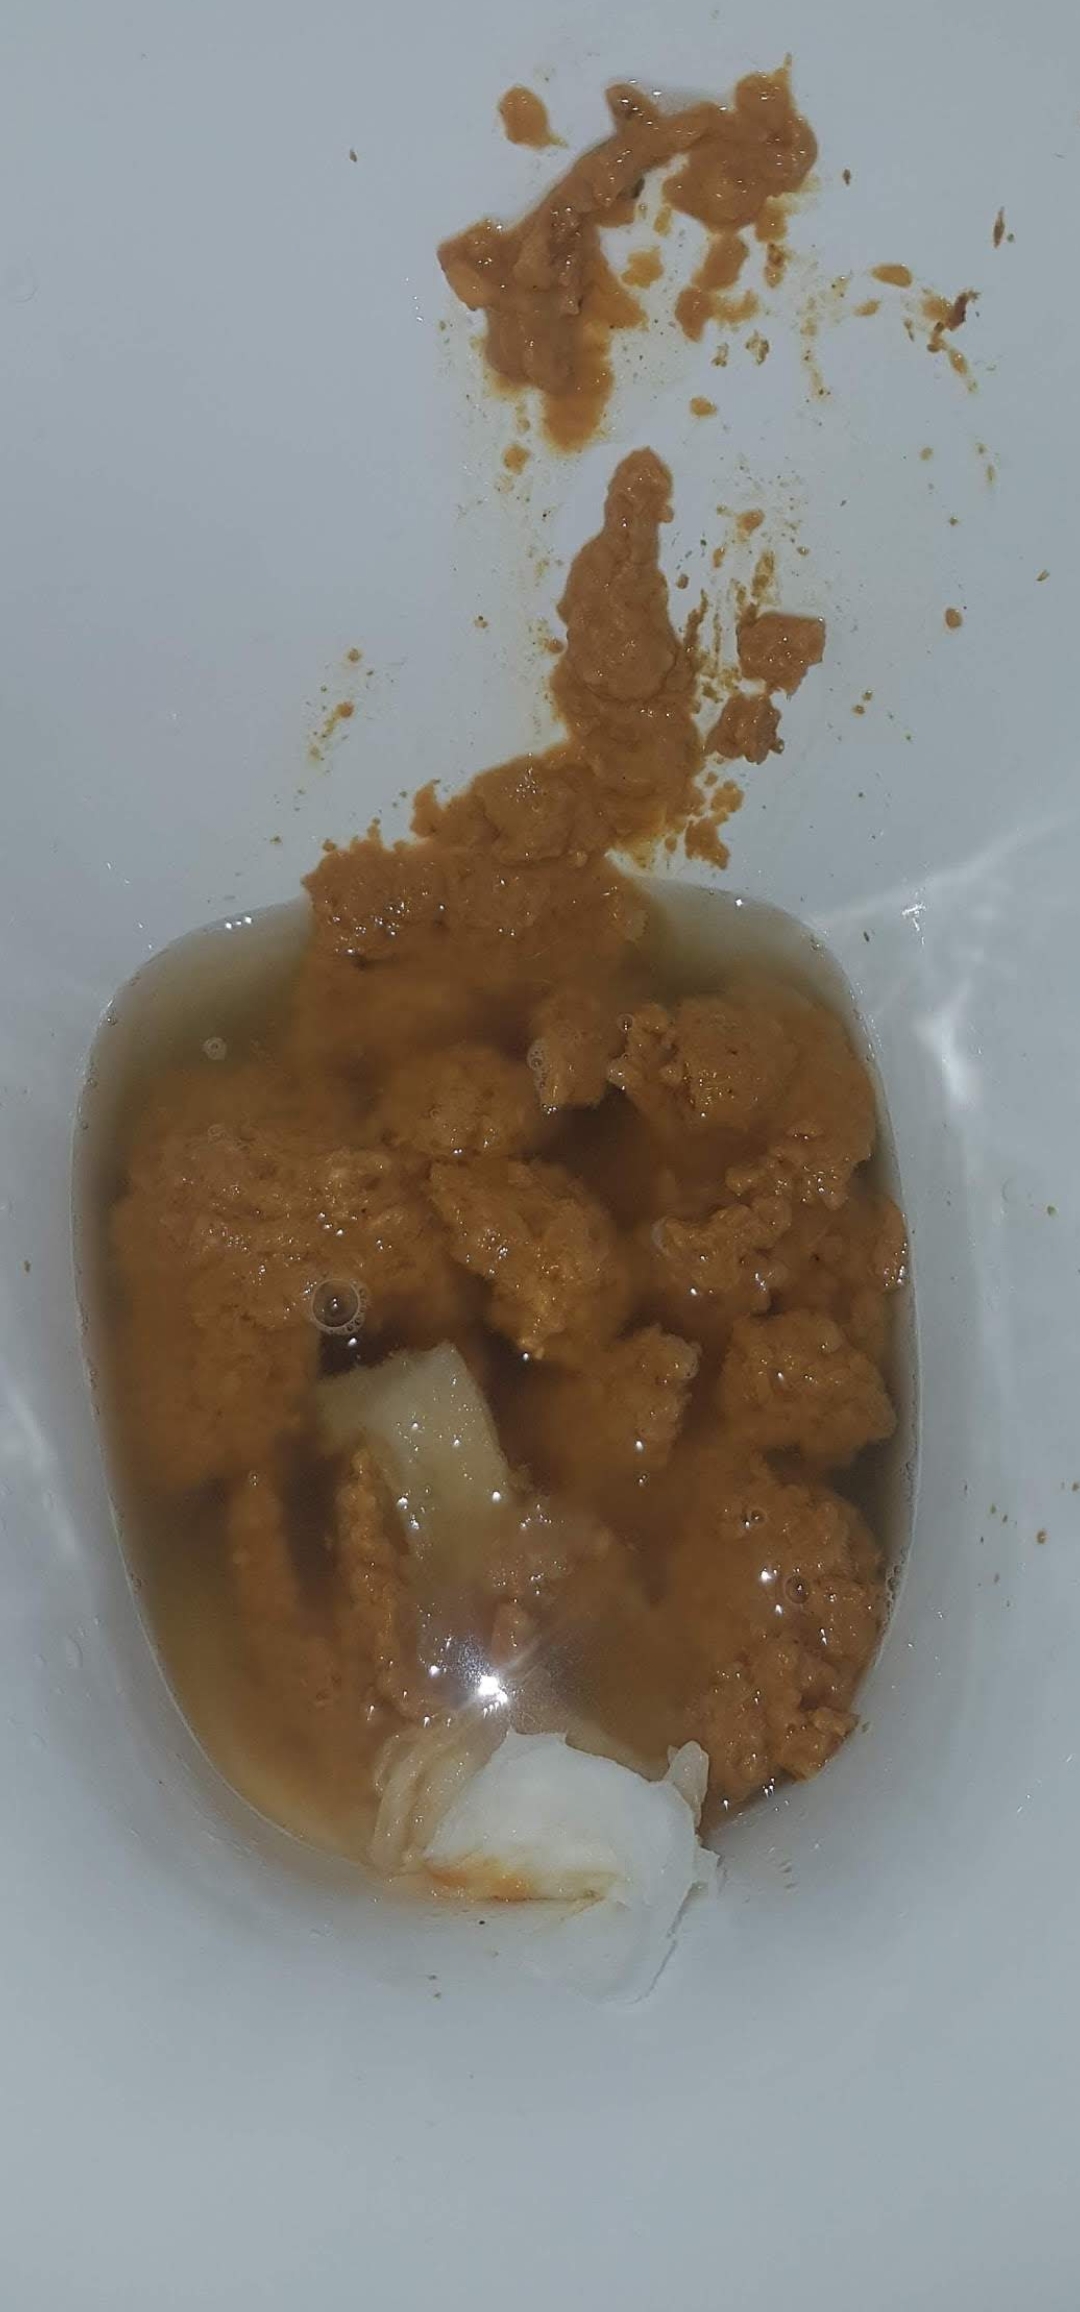 Desperate Friday morning loose shit on my friends loo